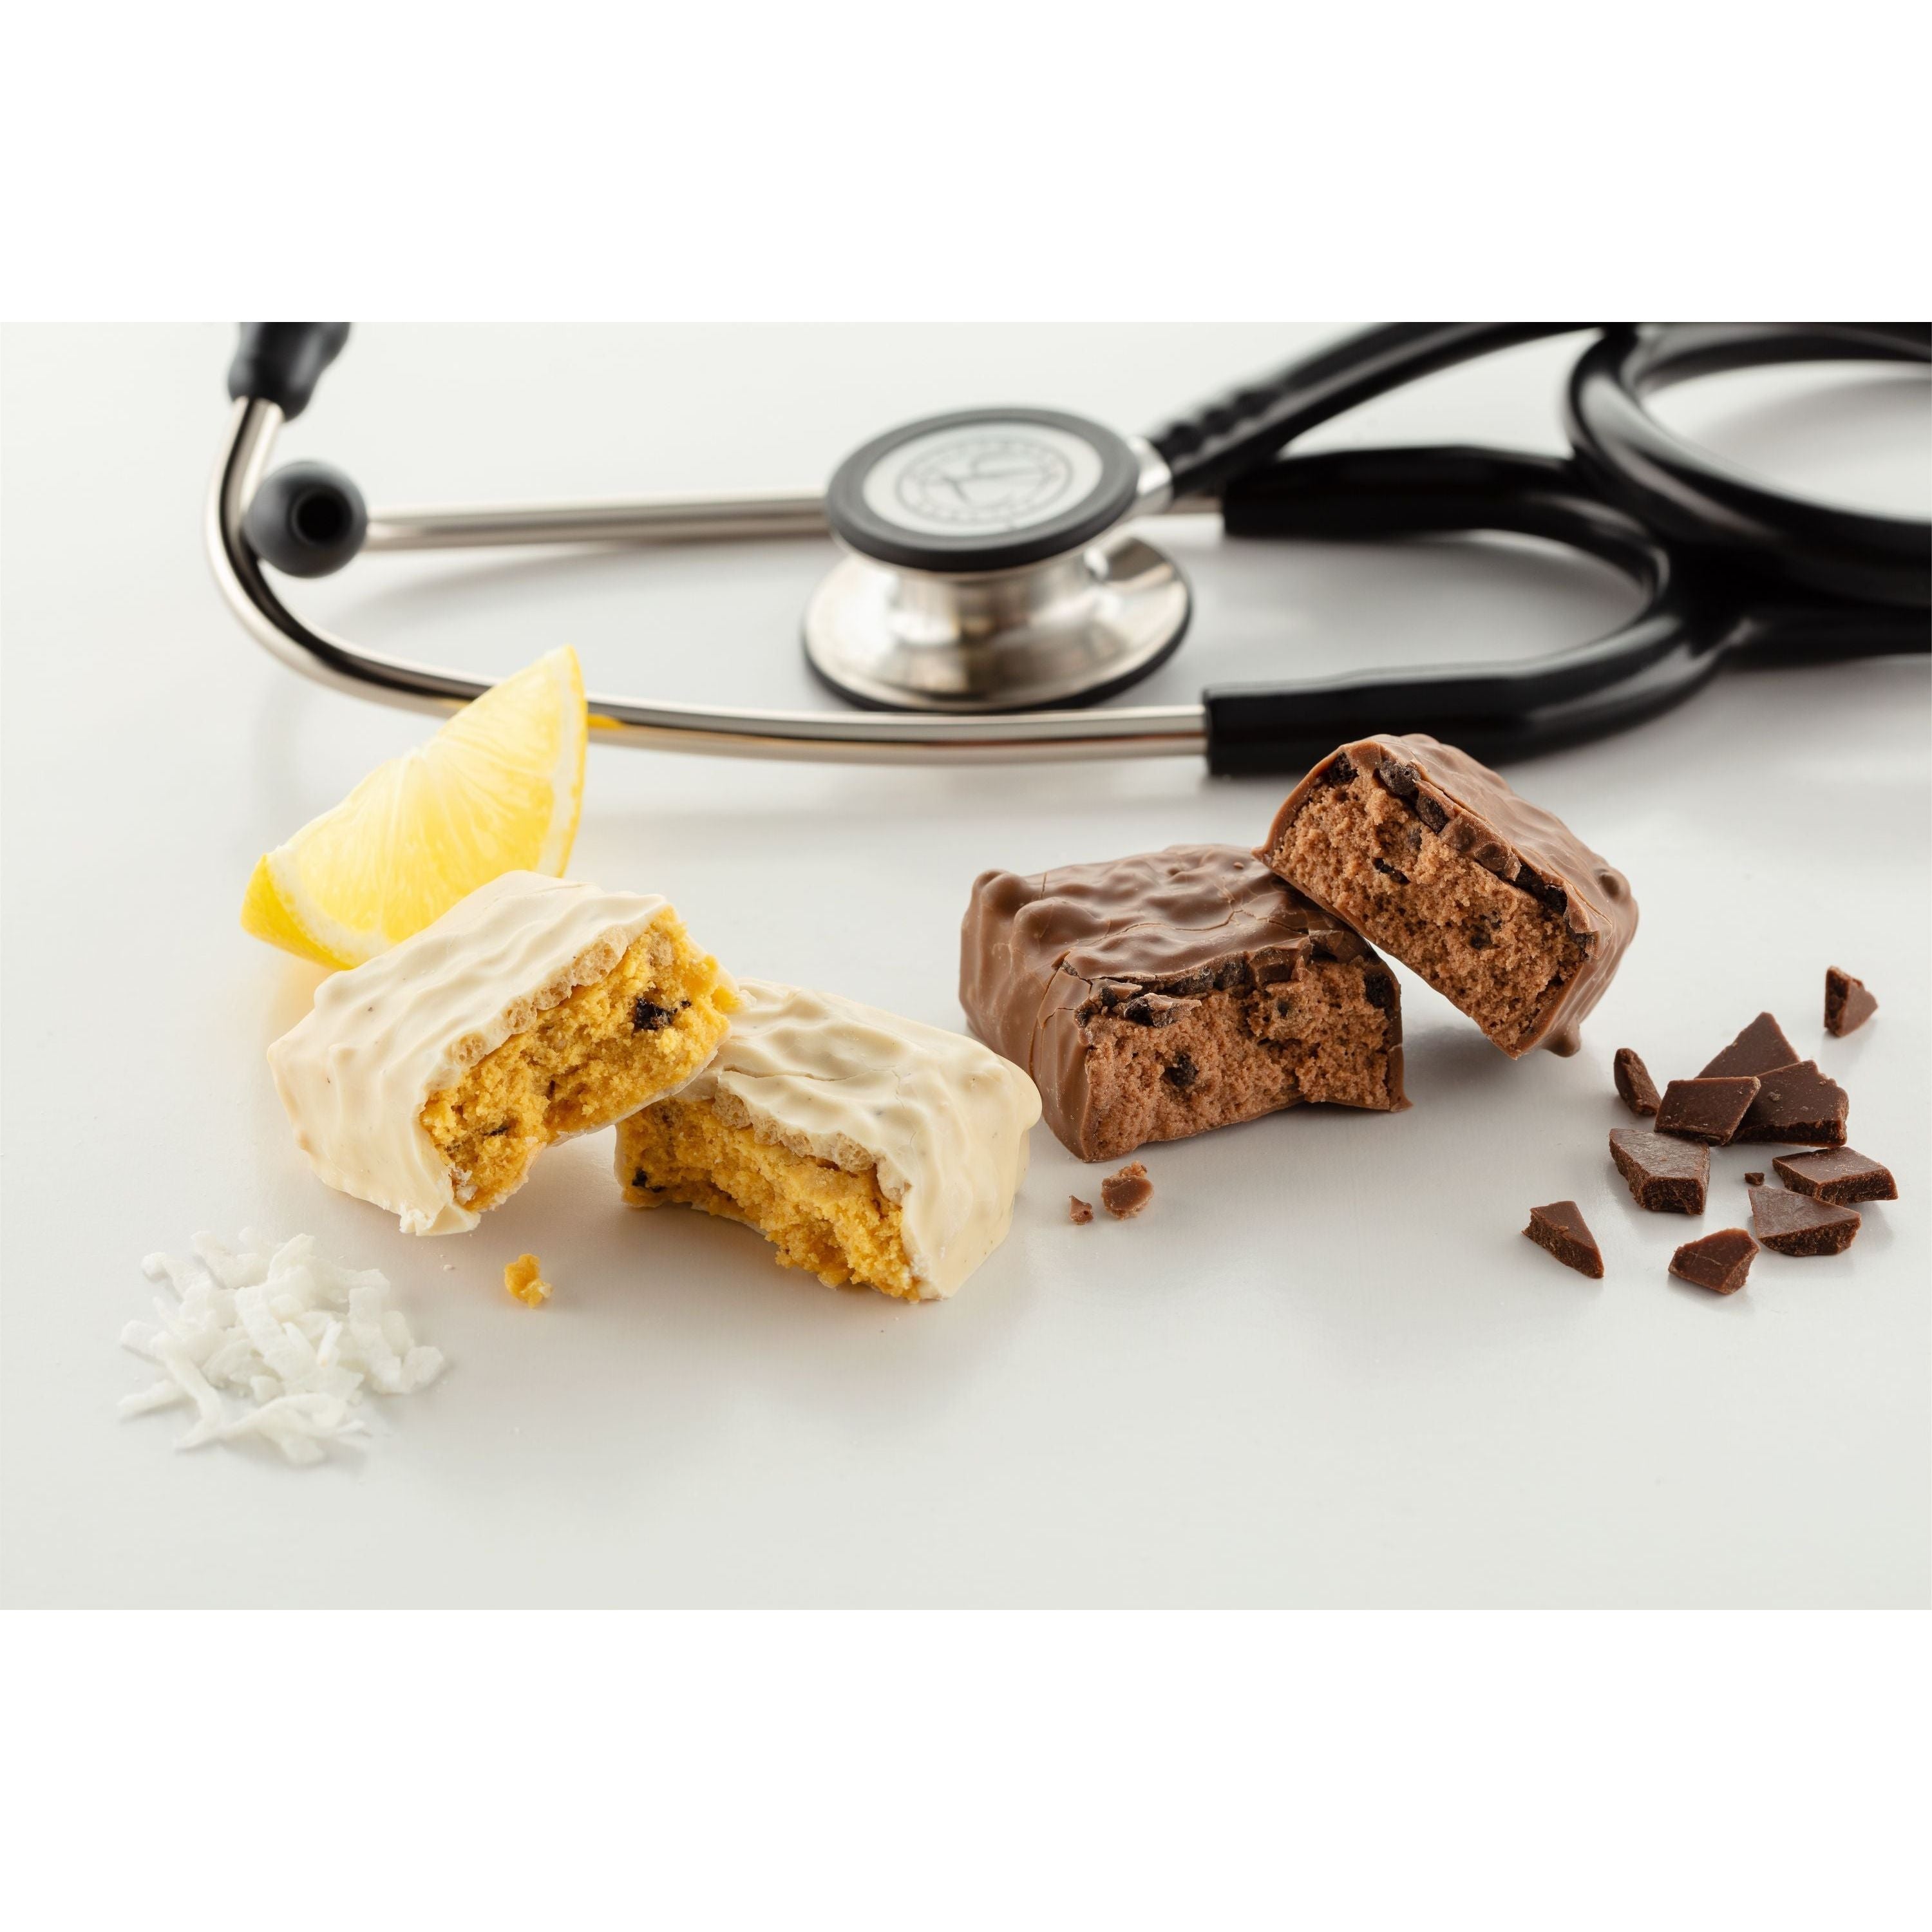 Formulite Meal Replacement Bars